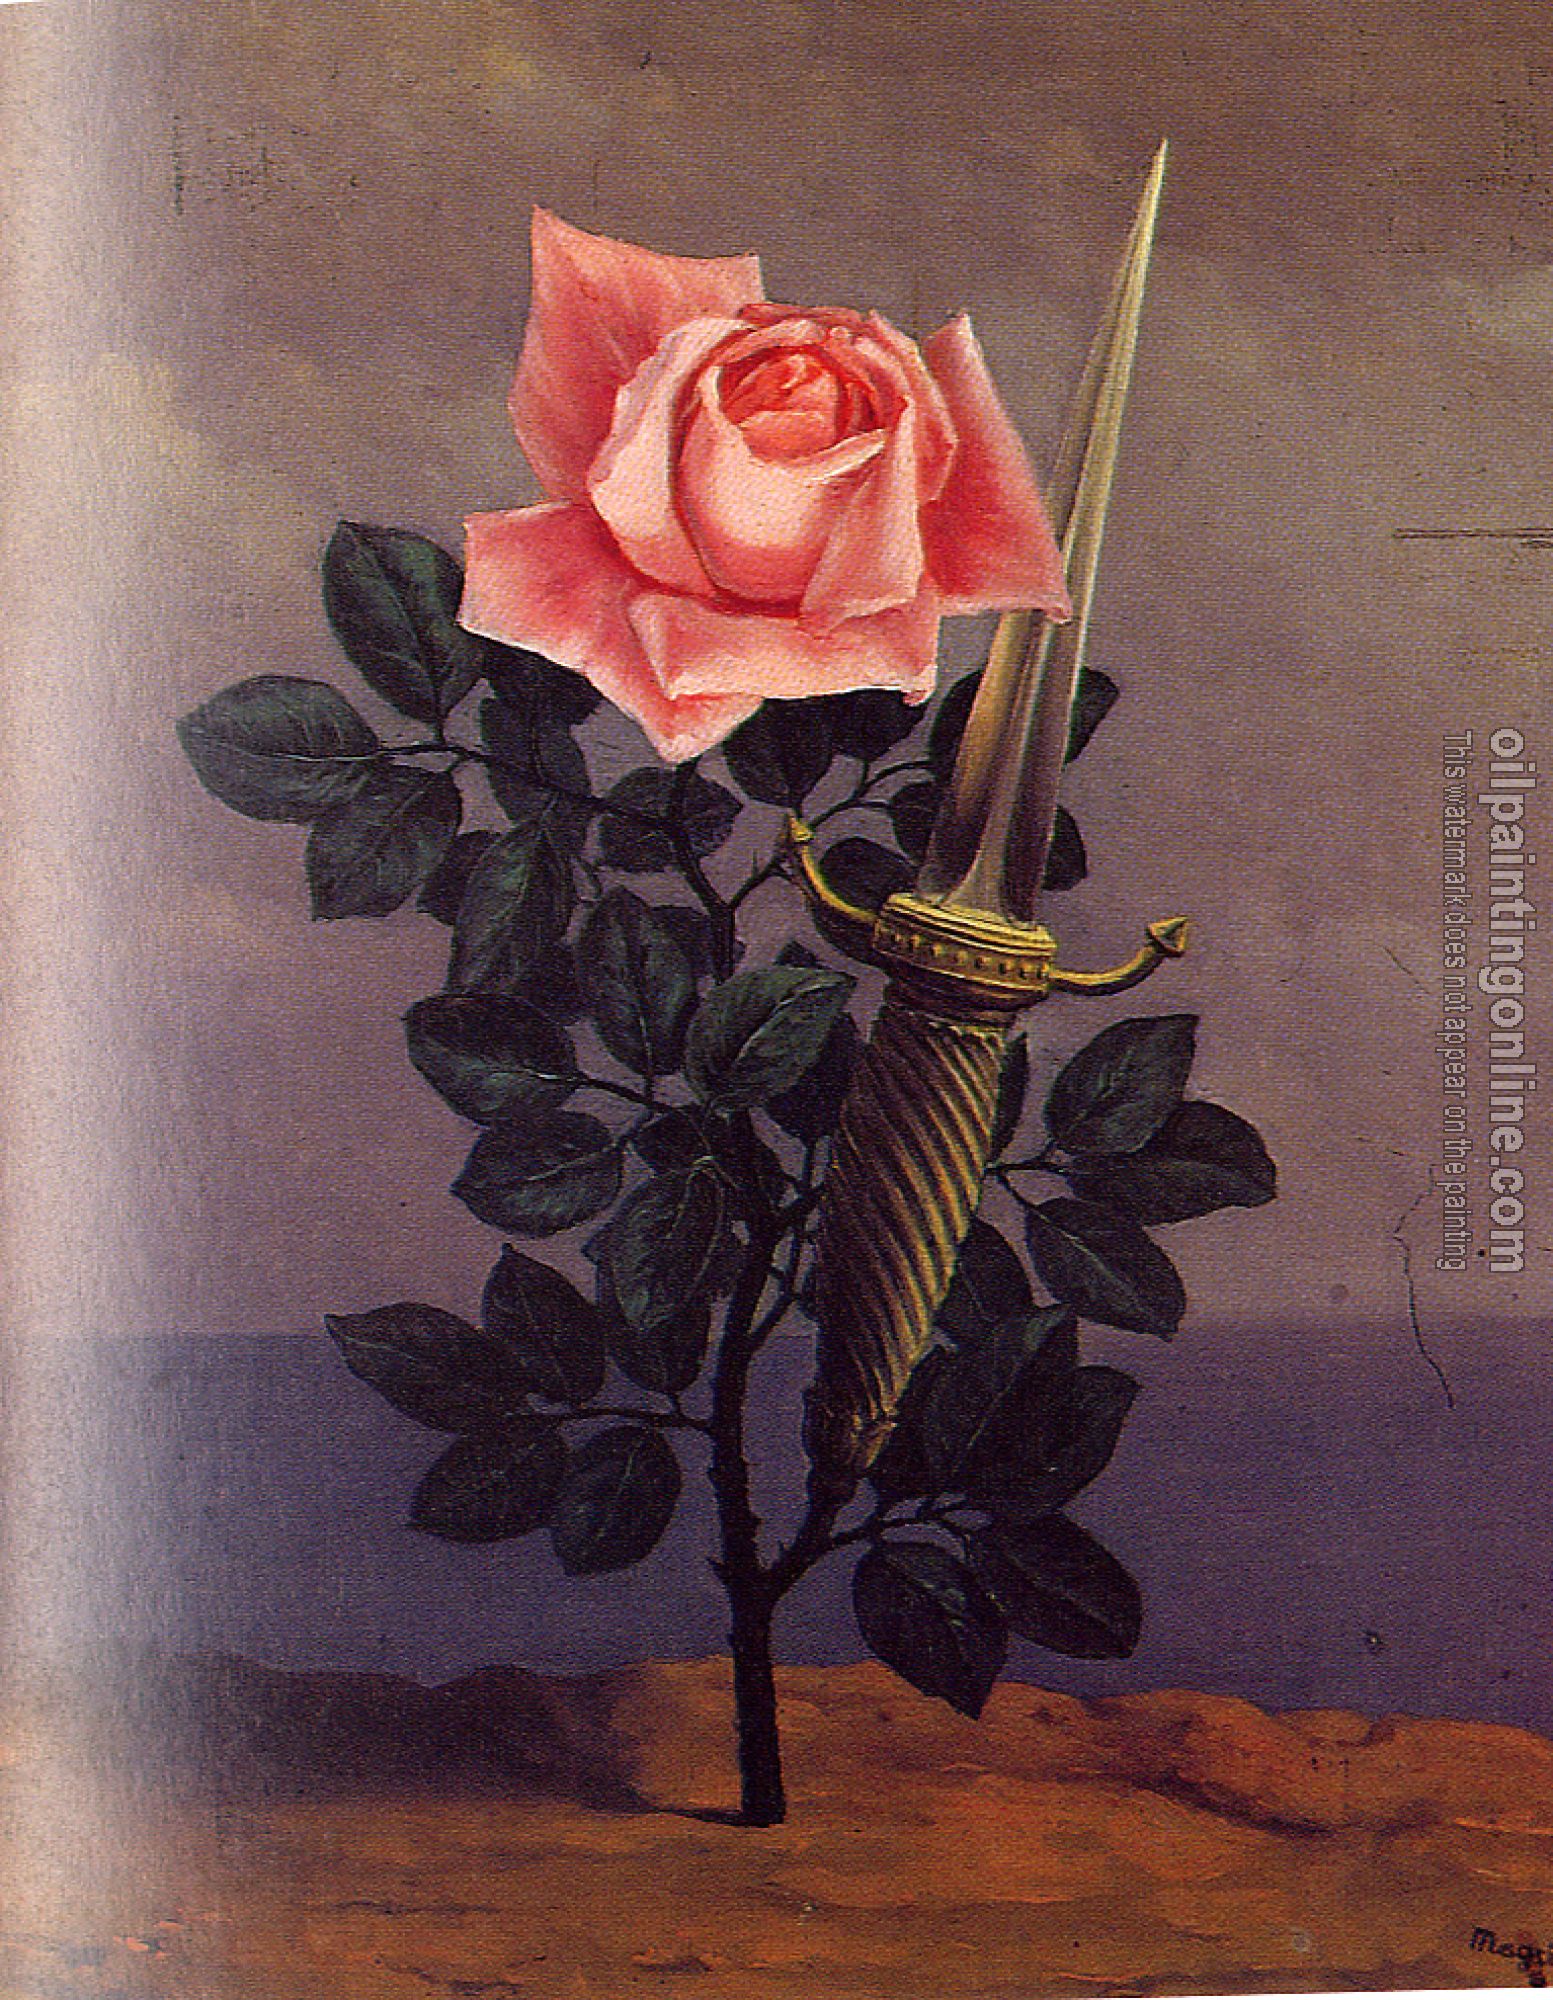 Magritte, Rene - the blow to the heart